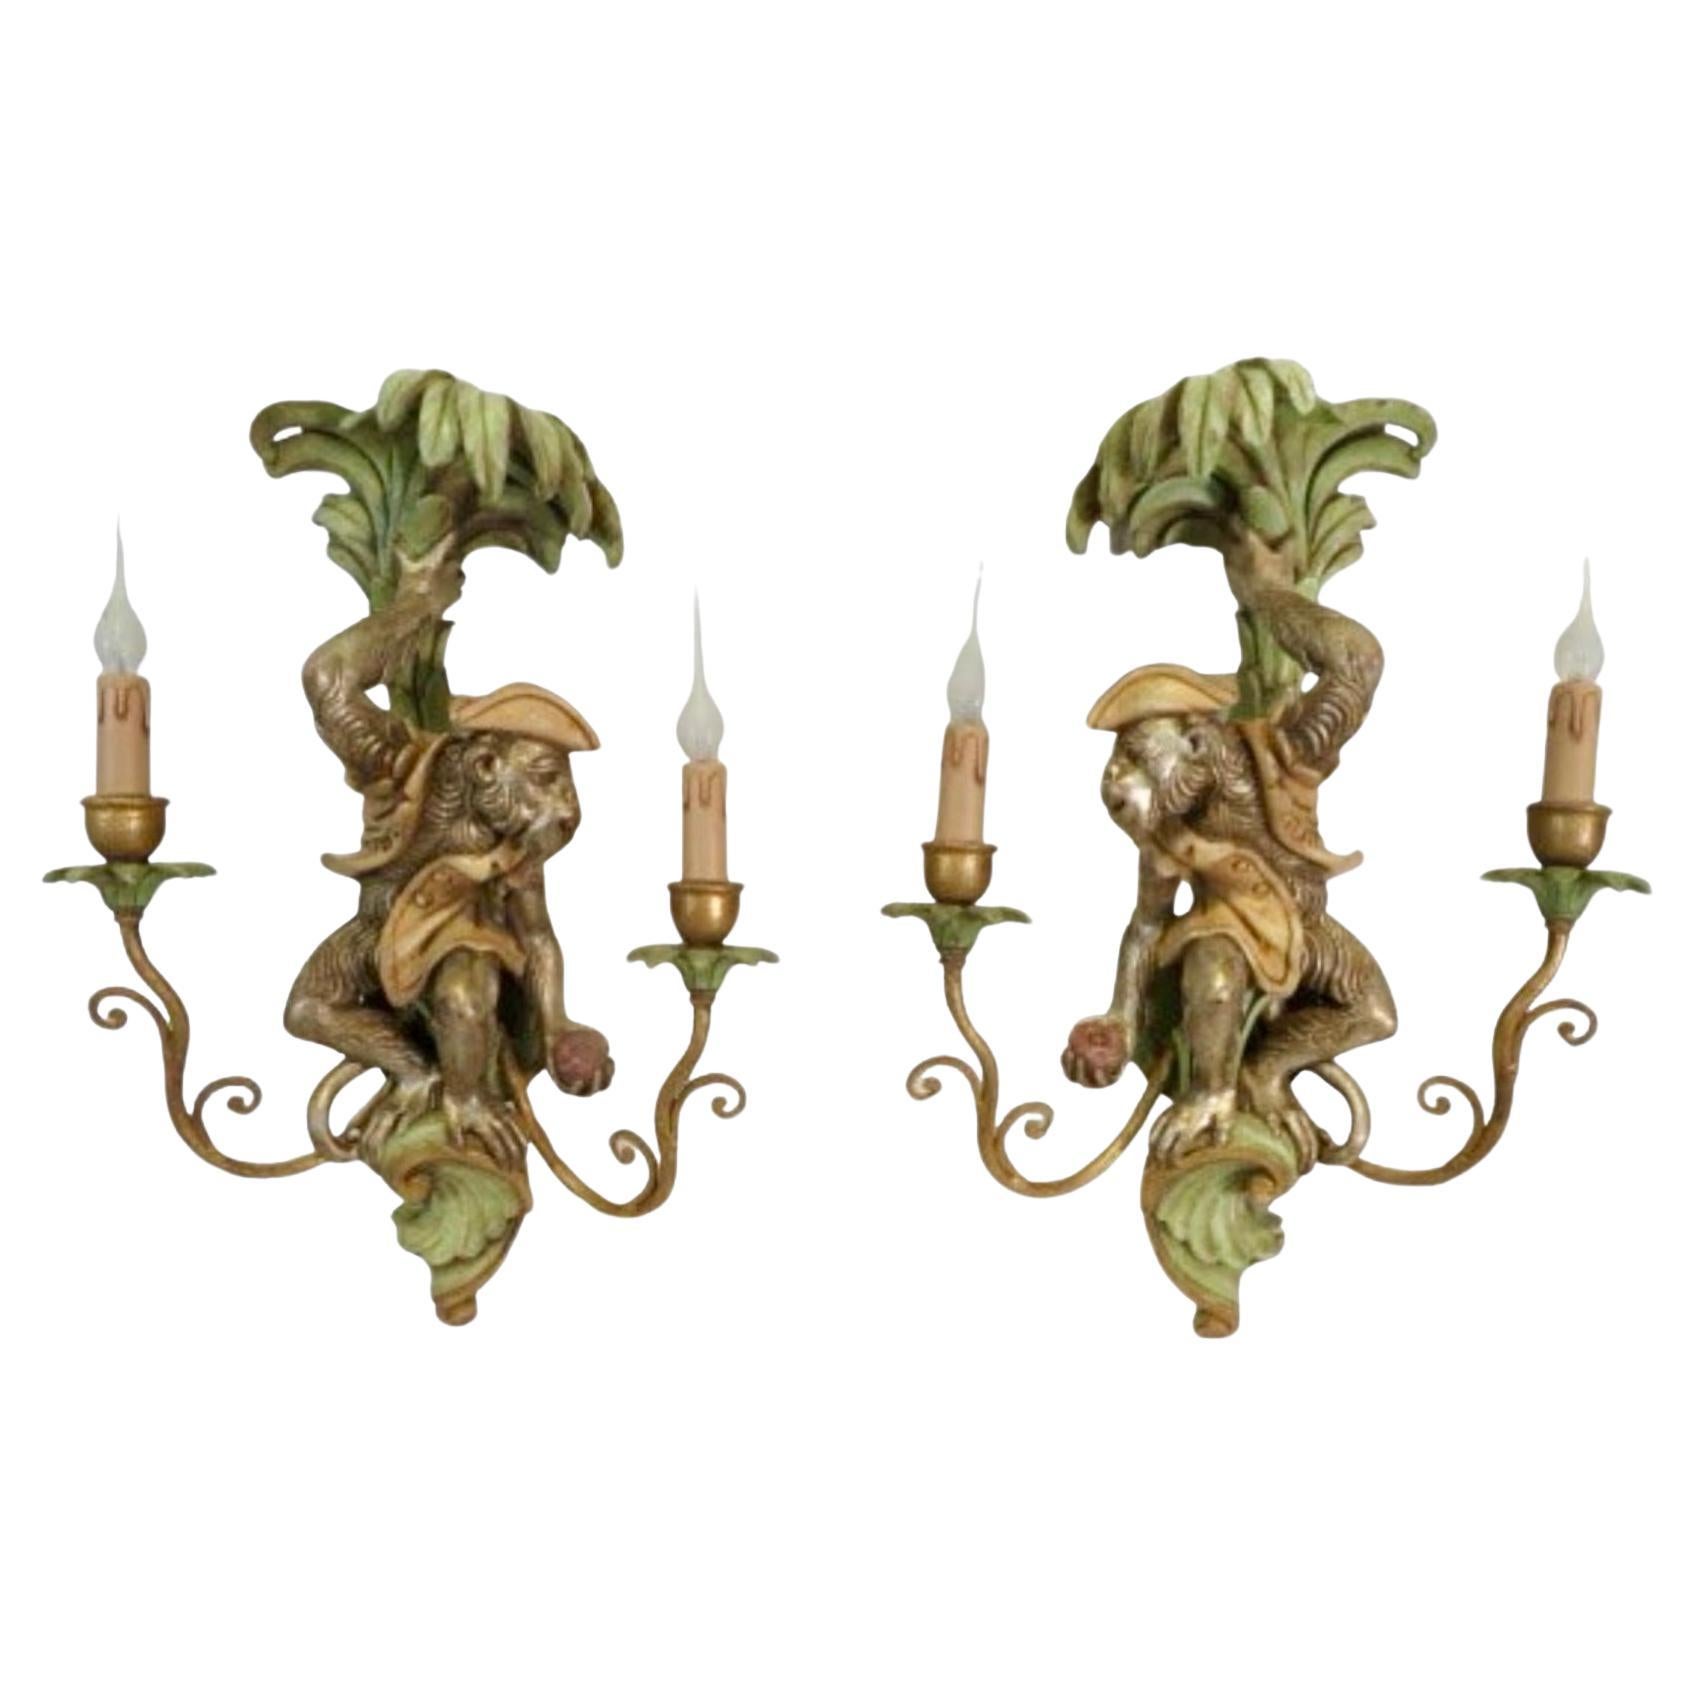 Decorative Crafts Italian Regency Style Carved Wood Monkey Palm Tree Sconces -2 For Sale